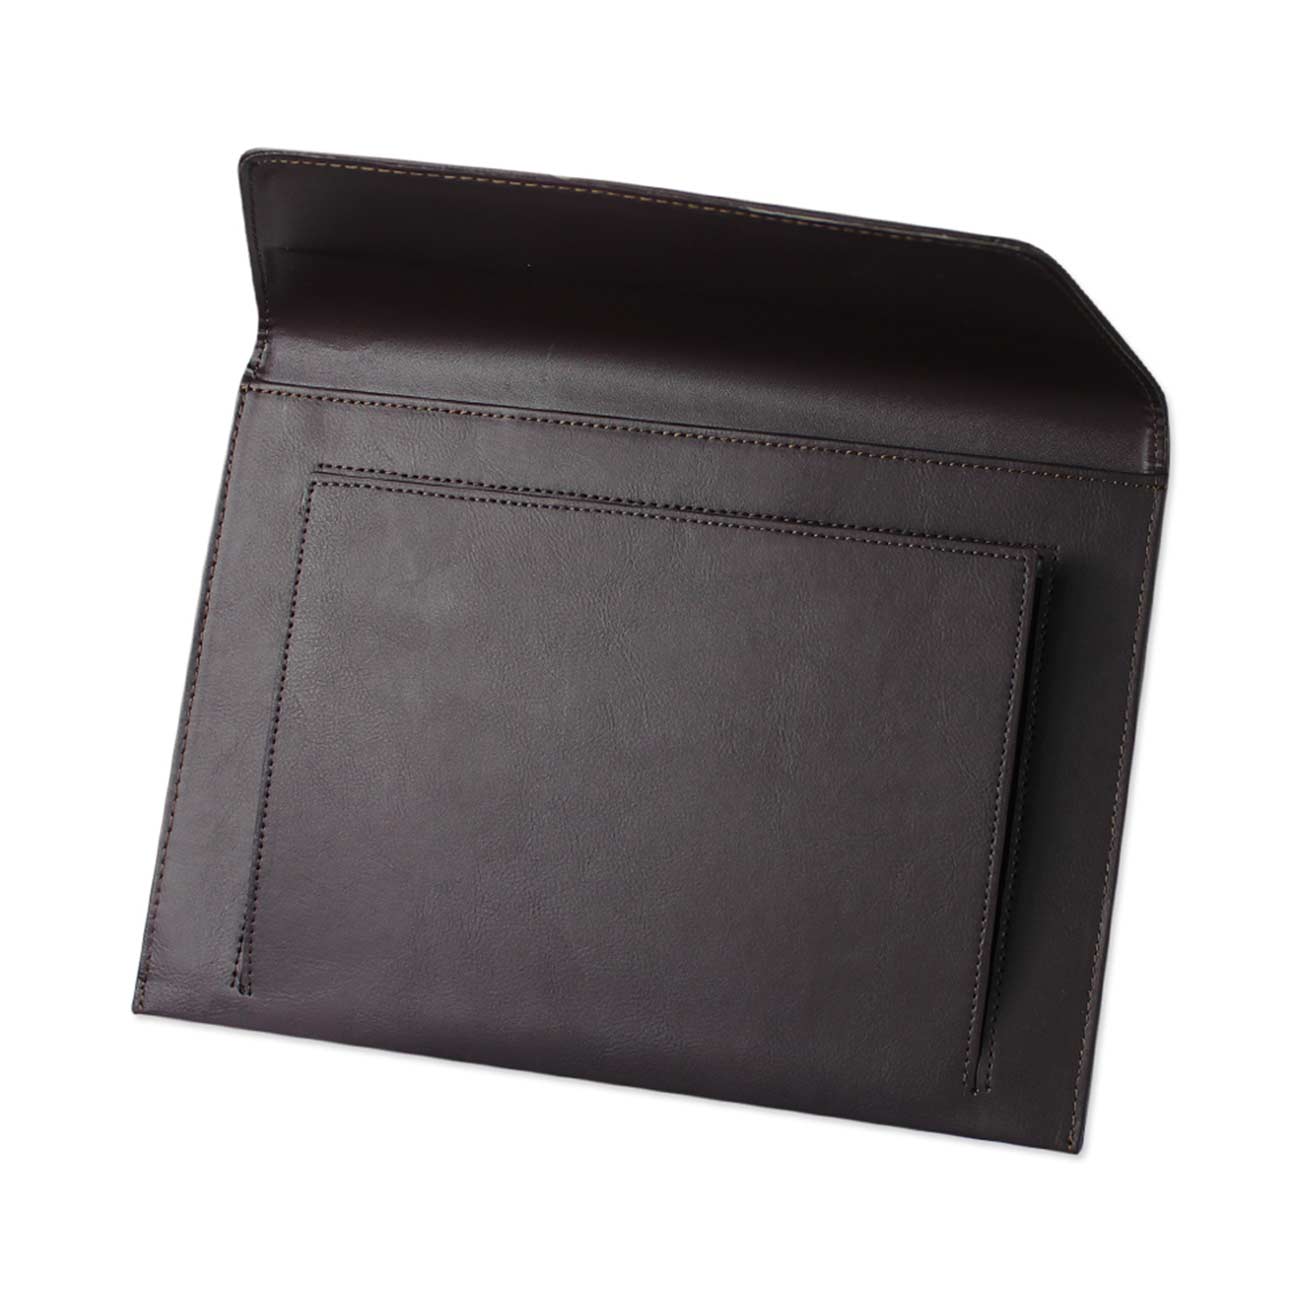 REIKO PREMIUM LEATHER CASE POUCH FOR 10.1INCHES IPADS AND TABLETS In BROWN